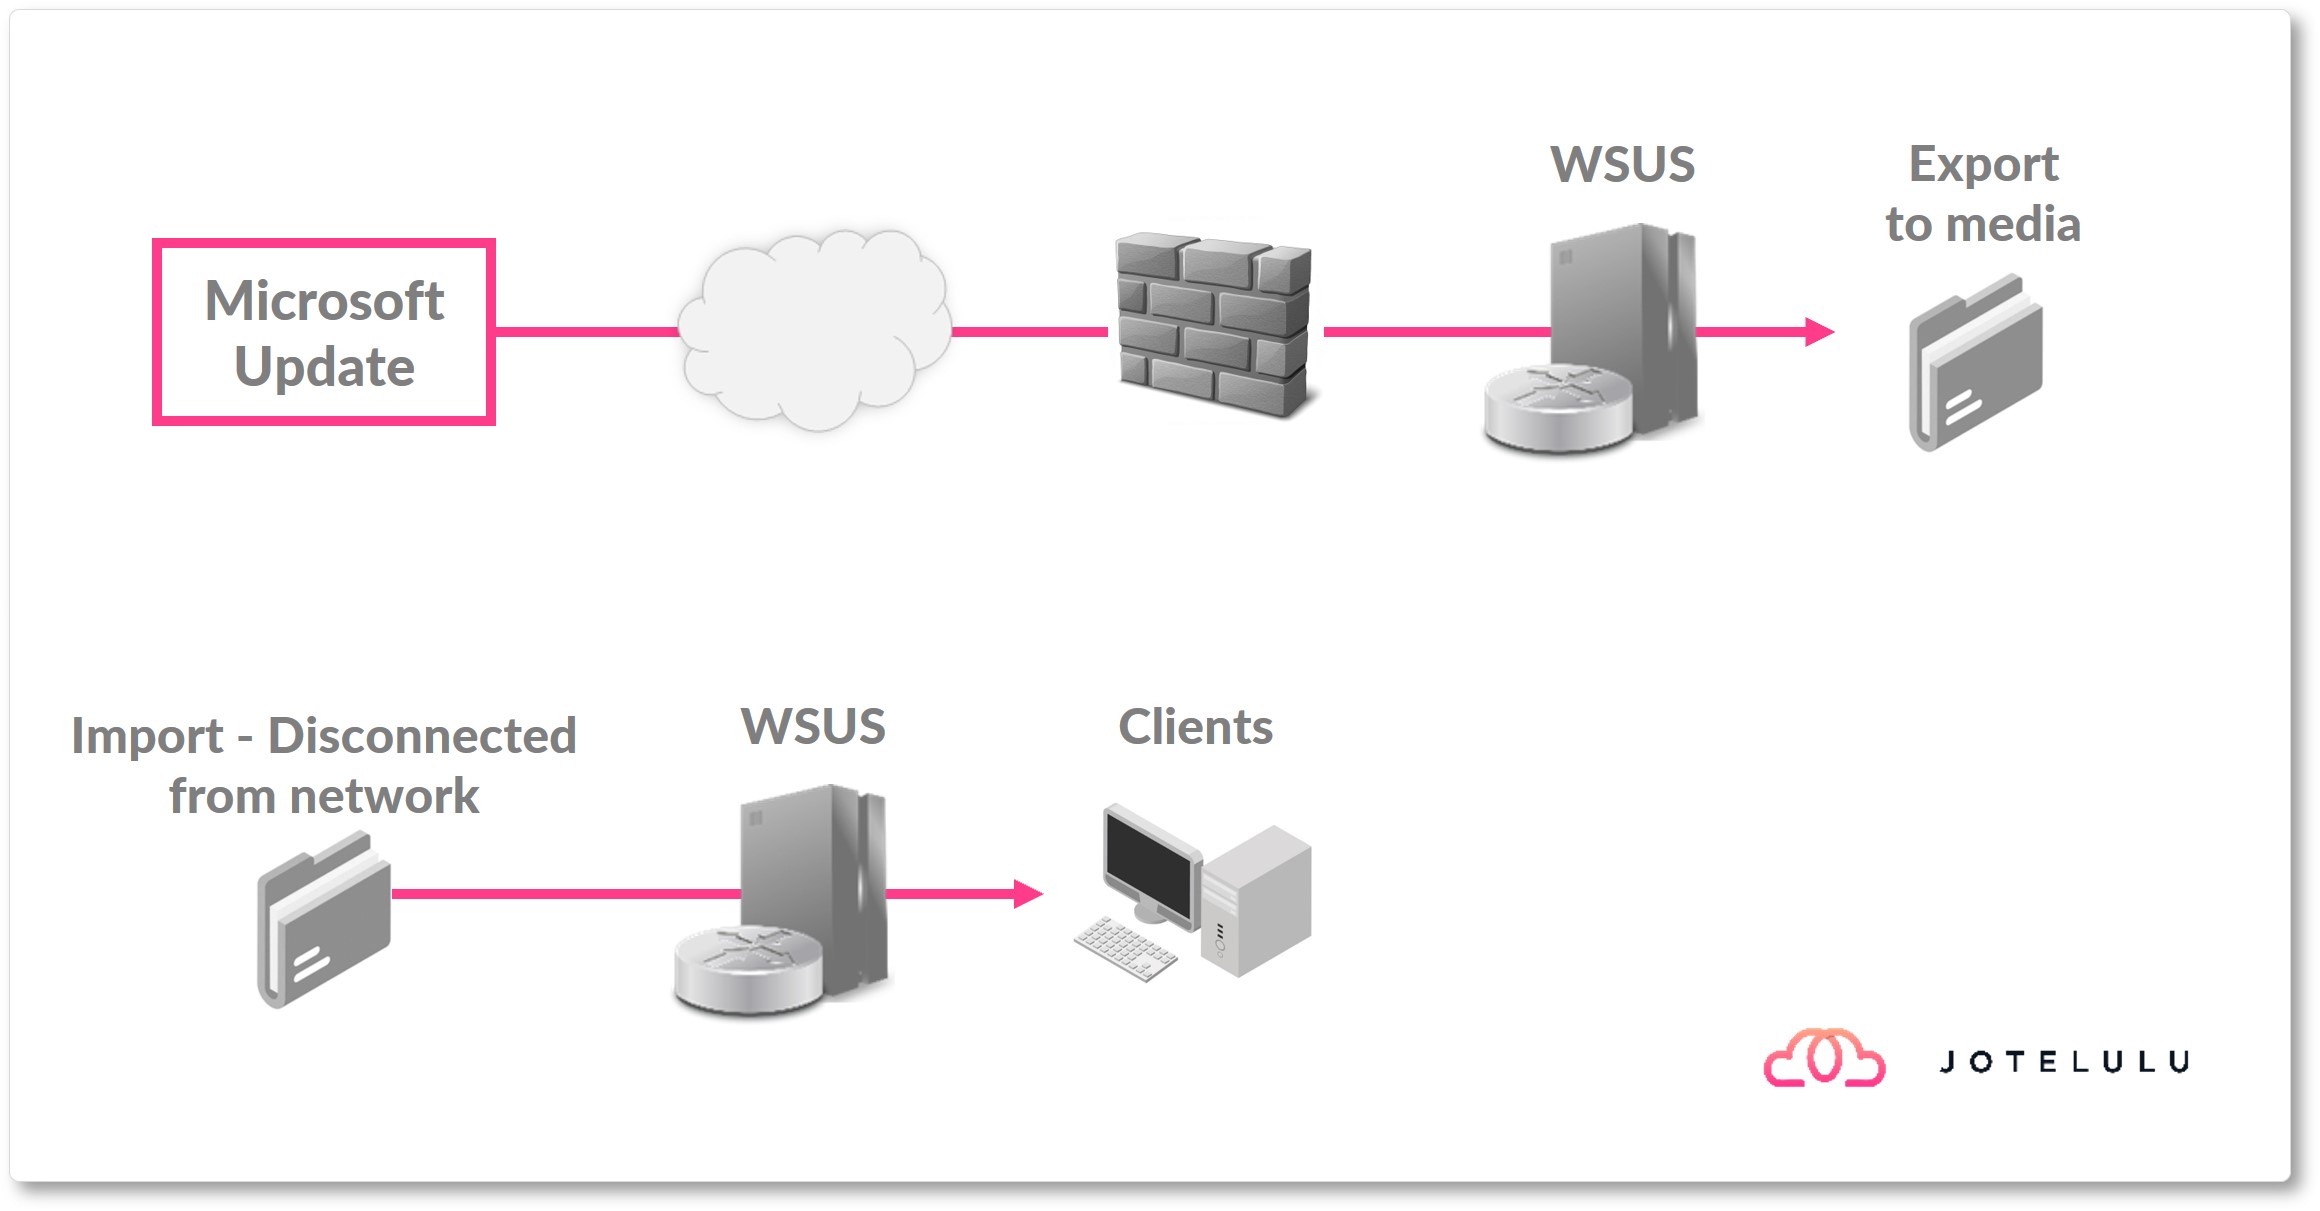 Image - Architecture with disconnected WSUS servers